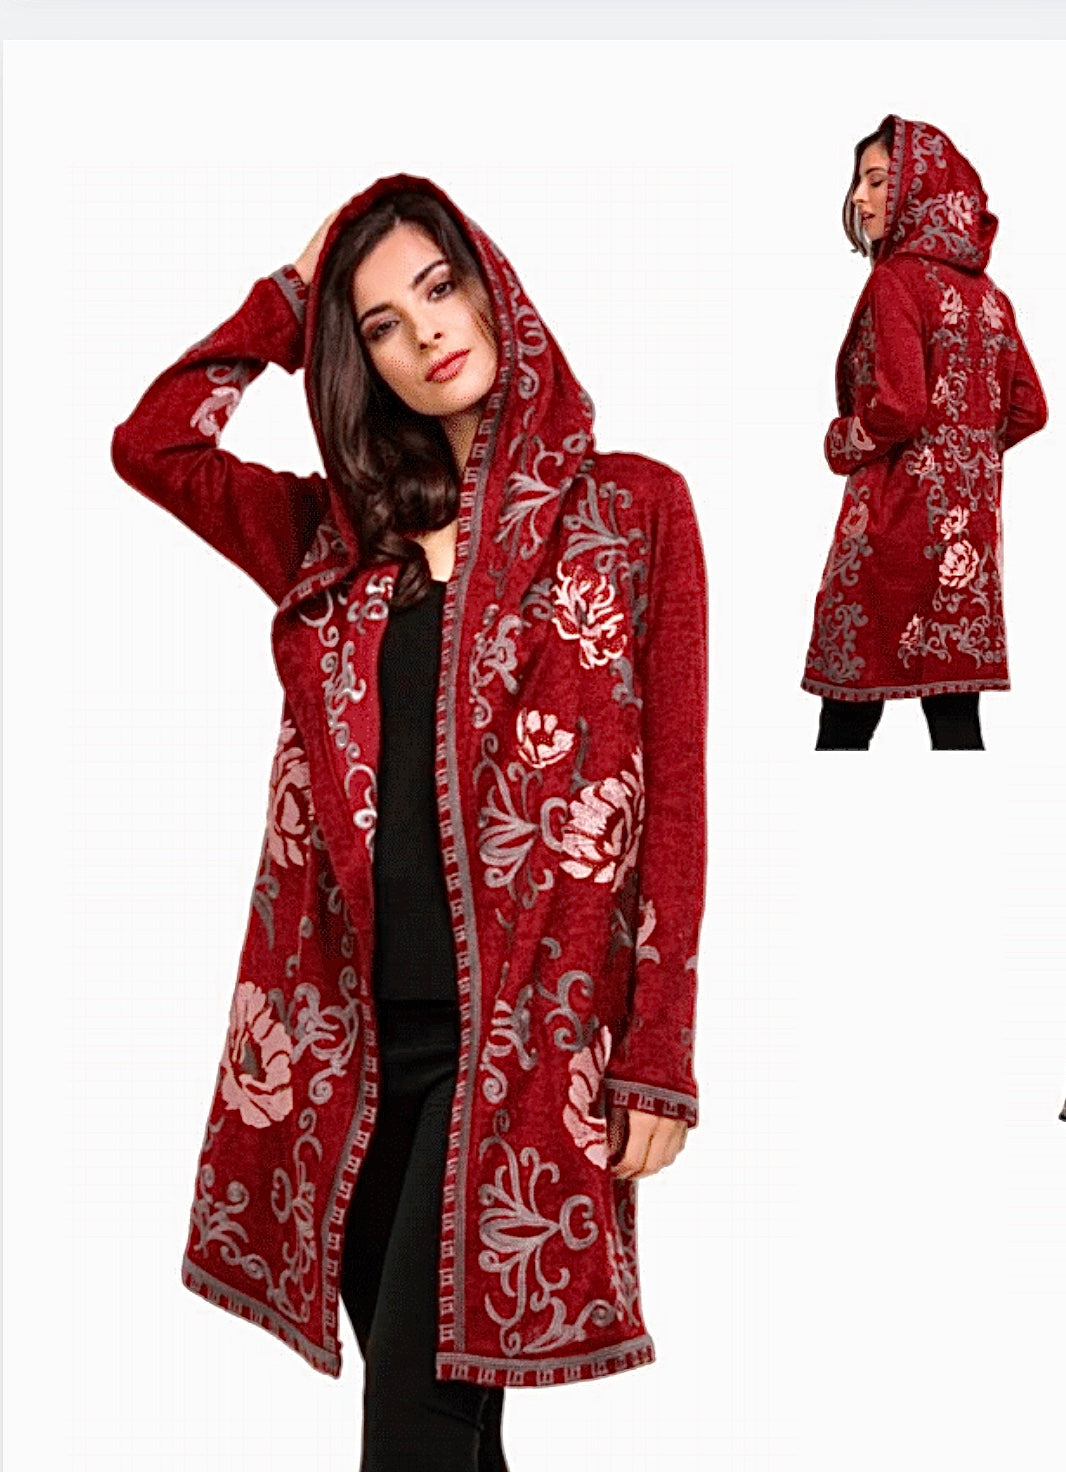 EMBROIDERED PINK FLOWER WINE COLOURED DUSTER COAT